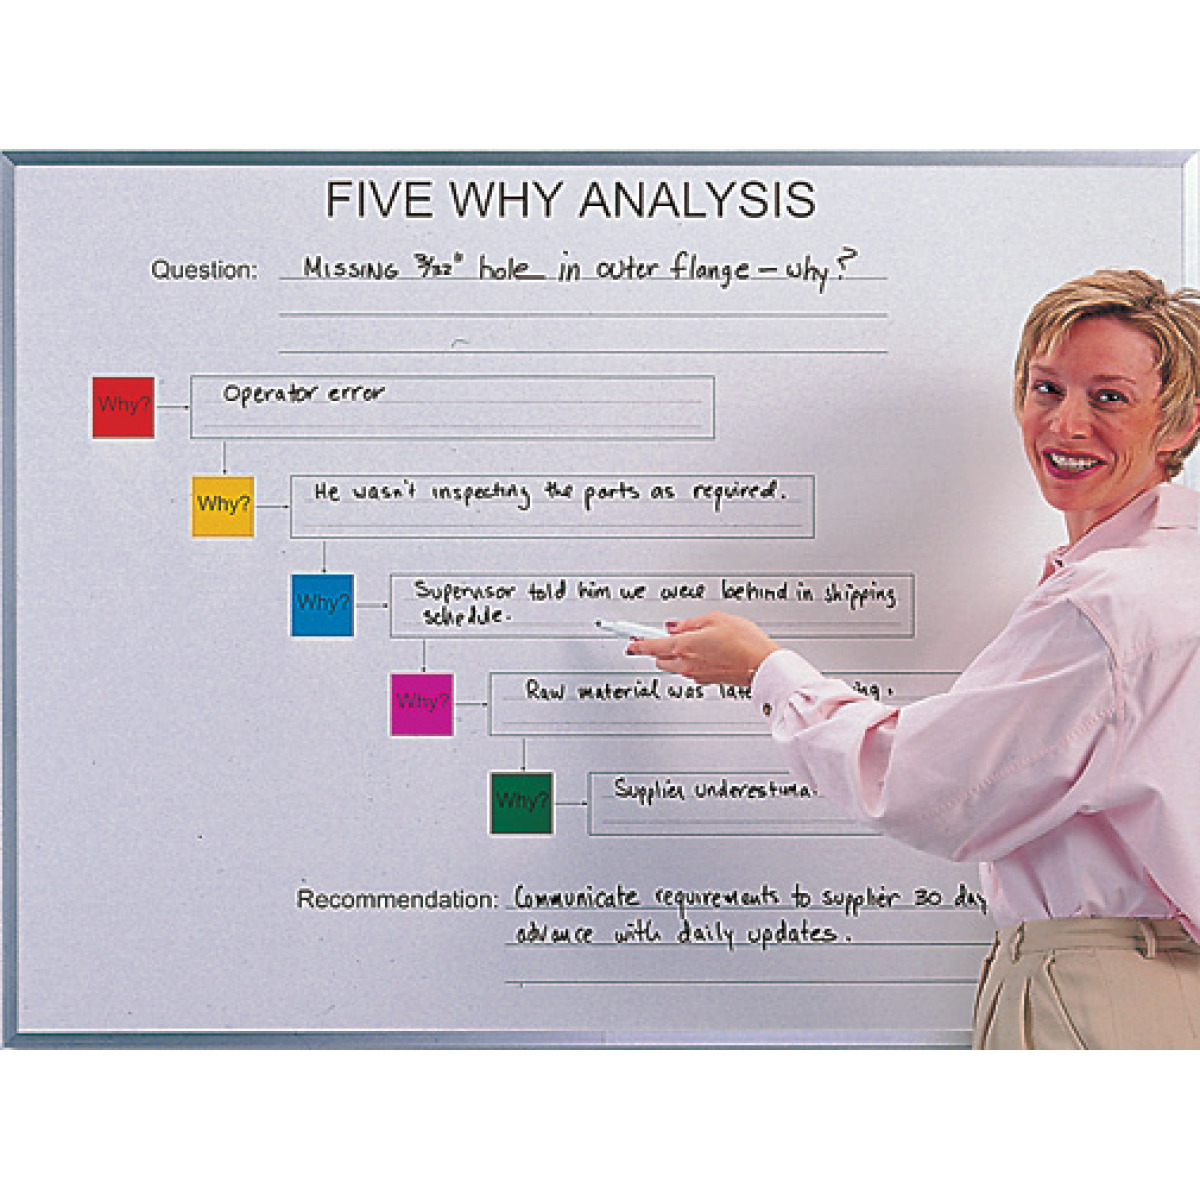 ask why five times chart whiteboard